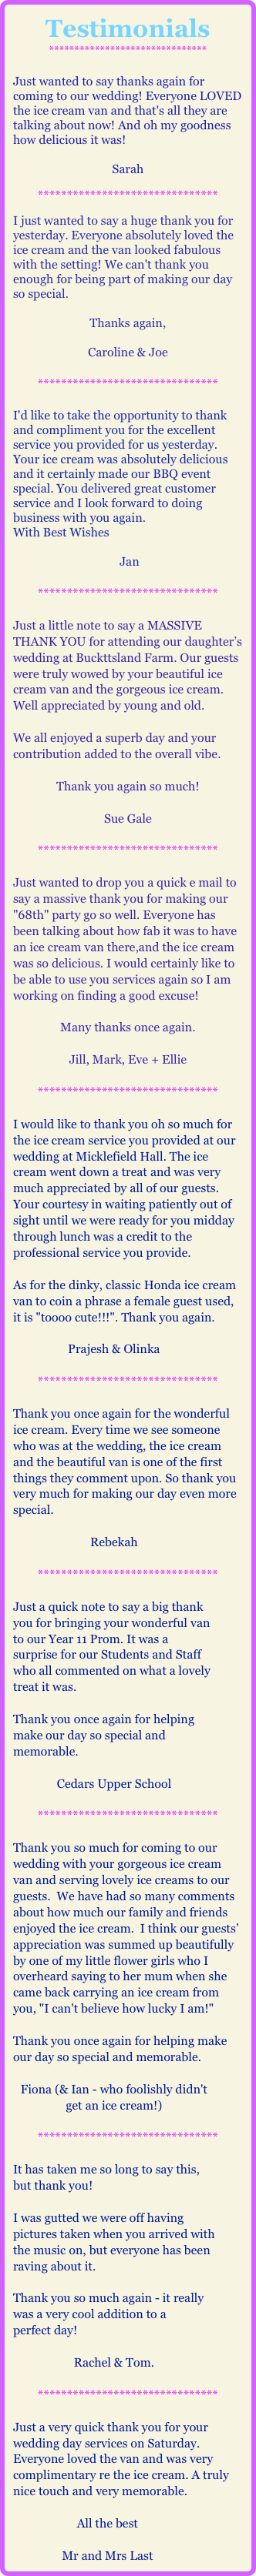 Testimonials
*******************************

Just wanted to say thanks again for coming to our wedding! Everyone LOVED the ice cream van and that's all they are talking about now! And oh my goodness how delicious it was! 

Sarah

*******************************

I just wanted to say a huge thank you for yesterday. Everyone absolutely loved the ice cream and the van looked fabulous with the setting! We can't thank you enough for being part of making our day so special.

Thanks again,

Caroline & Joe

*******************************

I'd like to take the opportunity to thank and compliment you for the excellent service you provided for us yesterday.
Your ice cream was absolutely delicious and it certainly made our BBQ event special. You delivered great customer service and I look forward to doing business with you again.
With Best Wishes

 Jan

*******************************

Just a little note to say a MASSIVE THANK YOU for attending our daughter’s wedding at Buckttsland Farm. Our guests were truly wowed by your beautiful ice cream van and the gorgeous ice cream. Well appreciated by young and old.

We all enjoyed a superb day and your contribution added to the overall vibe.

Thank you again so much!

Sue Gale

*******************************

Just wanted to drop you a quick e mail to say a massive thank you for making our "68th" party go so well. Everyone has been talking about how fab it was to have an ice cream van there,and the ice cream was so delicious. I would certainly like to be able to use you services again so I am working on finding a good excuse!

Many thanks once again.

Jill, Mark, Eve + Ellie

*******************************

I would like to thank you oh so much for the ice cream service you provided at our wedding at Micklefield Hall. The ice cream went down a treat and was very much appreciated by all of our guests. Your courtesy in waiting patiently out of sight until we were ready for you midday through lunch was a credit to the professional service you provide. 

As for the dinky, classic Honda ice cream van to coin a phrase a female guest used, it is "toooo cute!!!". Thank you again.
 
Prajesh & Olinka

*******************************

Thank you once again for the wonderful ice cream. Every time we see someone who was at the wedding, the ice cream and the beautiful van is one of the first things they comment upon. So thank you very much for making our day even more special. 

Rebekah

*******************************

Just a quick note to say a big thank you for bringing your wonderful van to our Year 11 Prom. It was a surprise for our Students and Staff who all commented on what a lovely treat it was.  

Thank you once again for helping make our day so special and memorable.

Cedars Upper School

*******************************

Thank you so much for coming to our wedding with your gorgeous ice cream van and serving lovely ice creams to our guests.  We have had so many comments about how much our family and friends enjoyed the ice cream.  I think our guests’ appreciation was summed up beautifully by one of my little flower girls who I overheard saying to her mum when she came back carrying an ice cream from you, "I can't believe how lucky I am!"

Thank you once again for helping make our day so special and memorable.

Fiona (& Ian - who foolishly didn't get an ice cream!)

*******************************

It has taken me so long to say this, but thank you!

I was gutted we were off having
pictures taken when you arrived with the music on, but everyone has been raving about it. 

Thank you so much again - it really was a very cool addition to a
perfect day!

Rachel & Tom. 

*******************************

Just a very quick thank you for your wedding day services on Saturday. Everyone loved the van and was very complimentary re the ice cream. A truly nice touch and very memorable.

All the best
 
Mr and Mrs Last